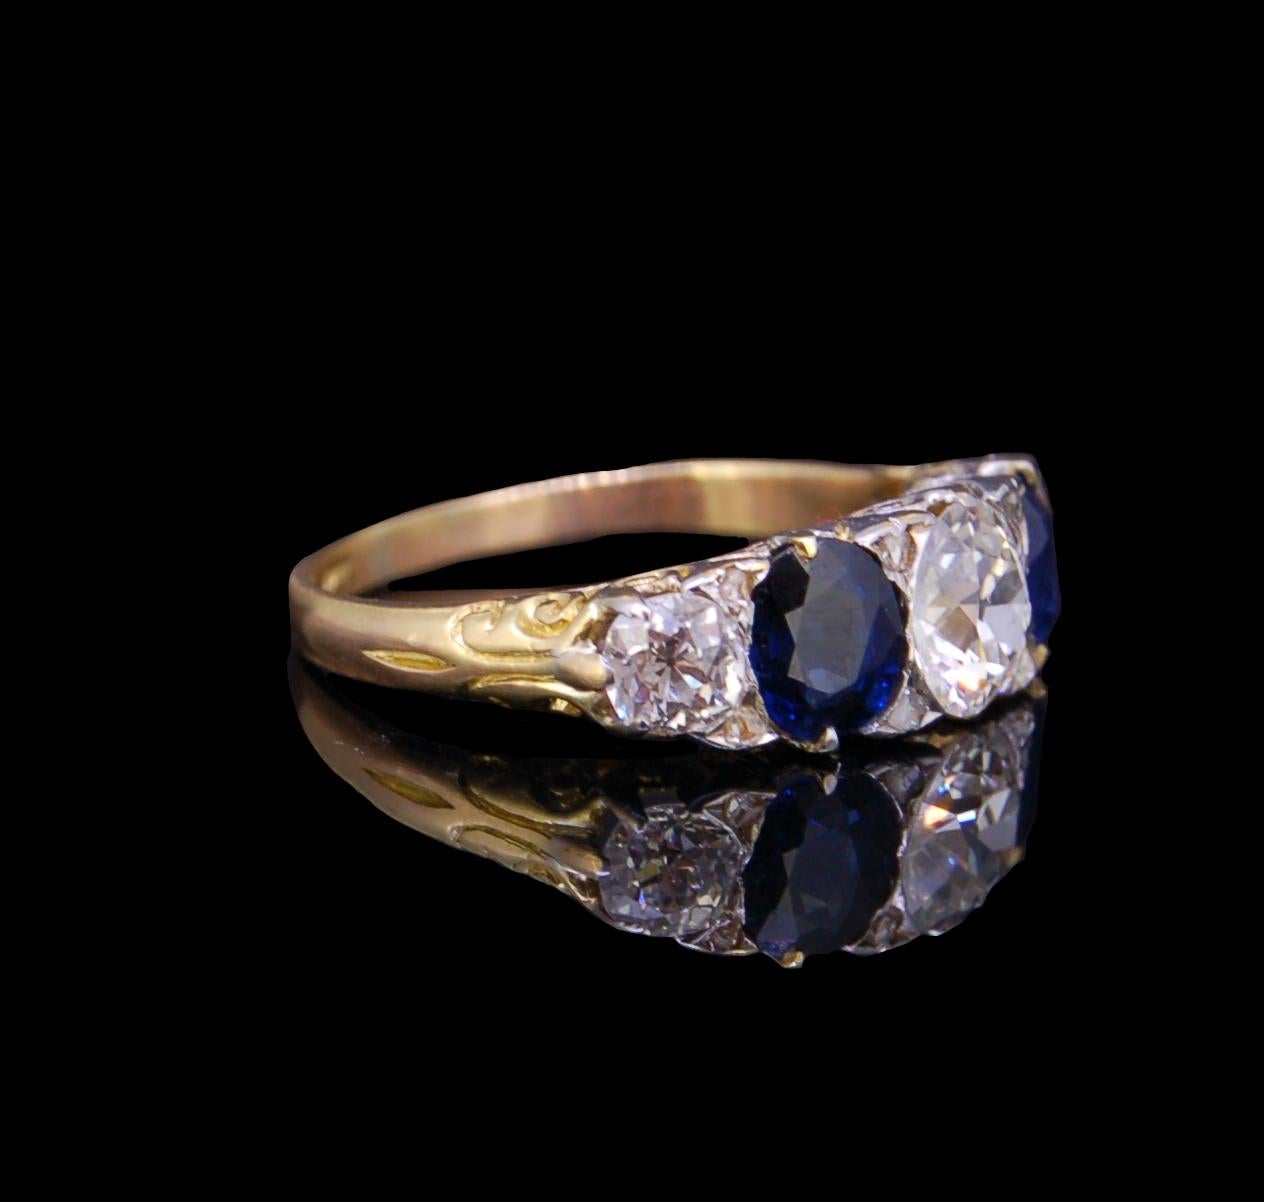 SAPPHIRE AND DIAMOND 5-STONE RING, set with 3 diamonds totalling 1.32 ct. (center 0.80 ct. sides 0.26 ct). and 2 blue sapphires totalling approx. 1.46 ct. (approx. 0.73 ct each.) Size N1/2 3.5 grams.